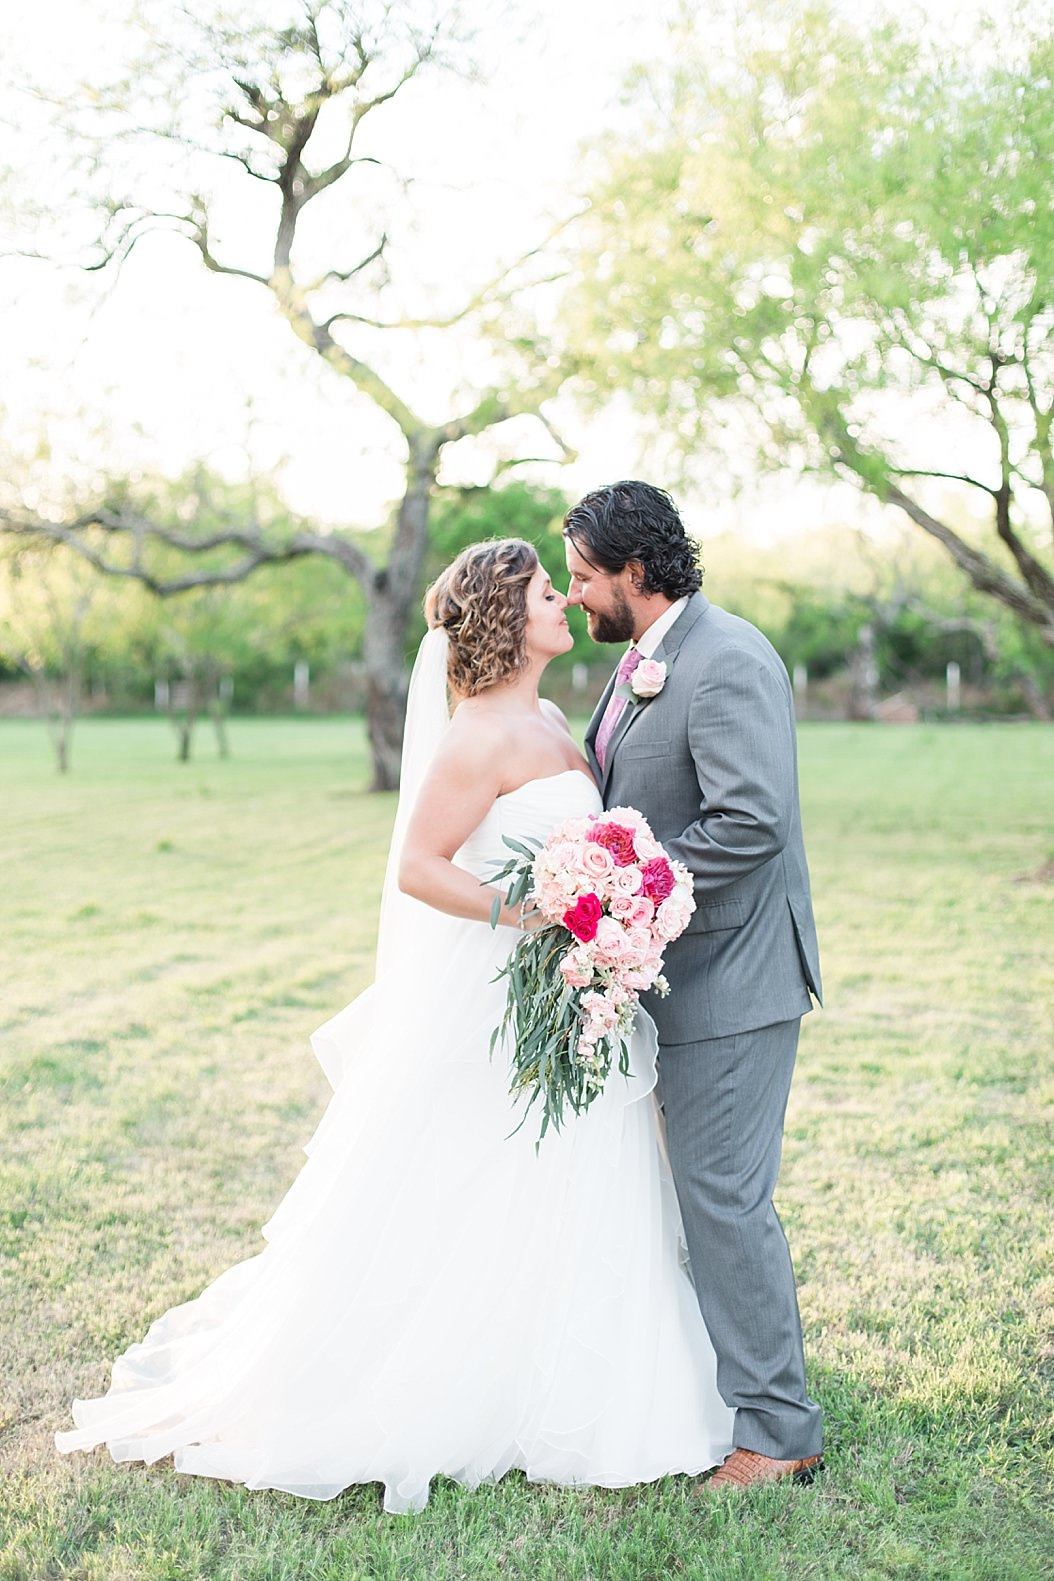 A Spring blush and mint wedding at Rancho La Mission in San Antonio Texas by Allison Jeffers Wedding Photography 0073